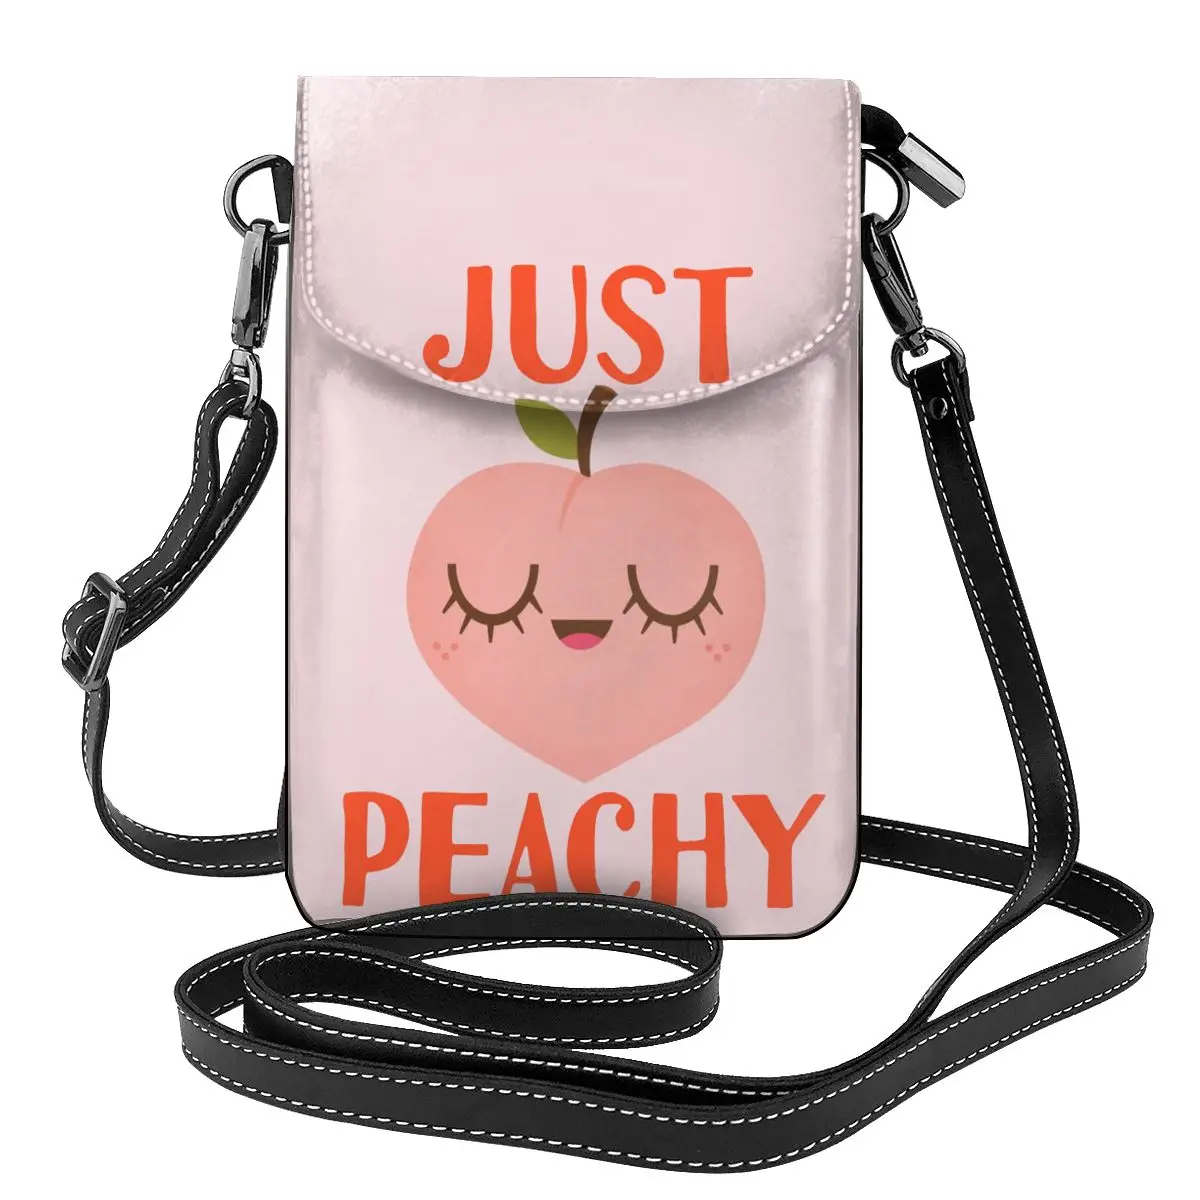 

Just Peachy Shoulder Bag Fruits Cartoon Gifts Funny Women Bags Leather Work Student Purse